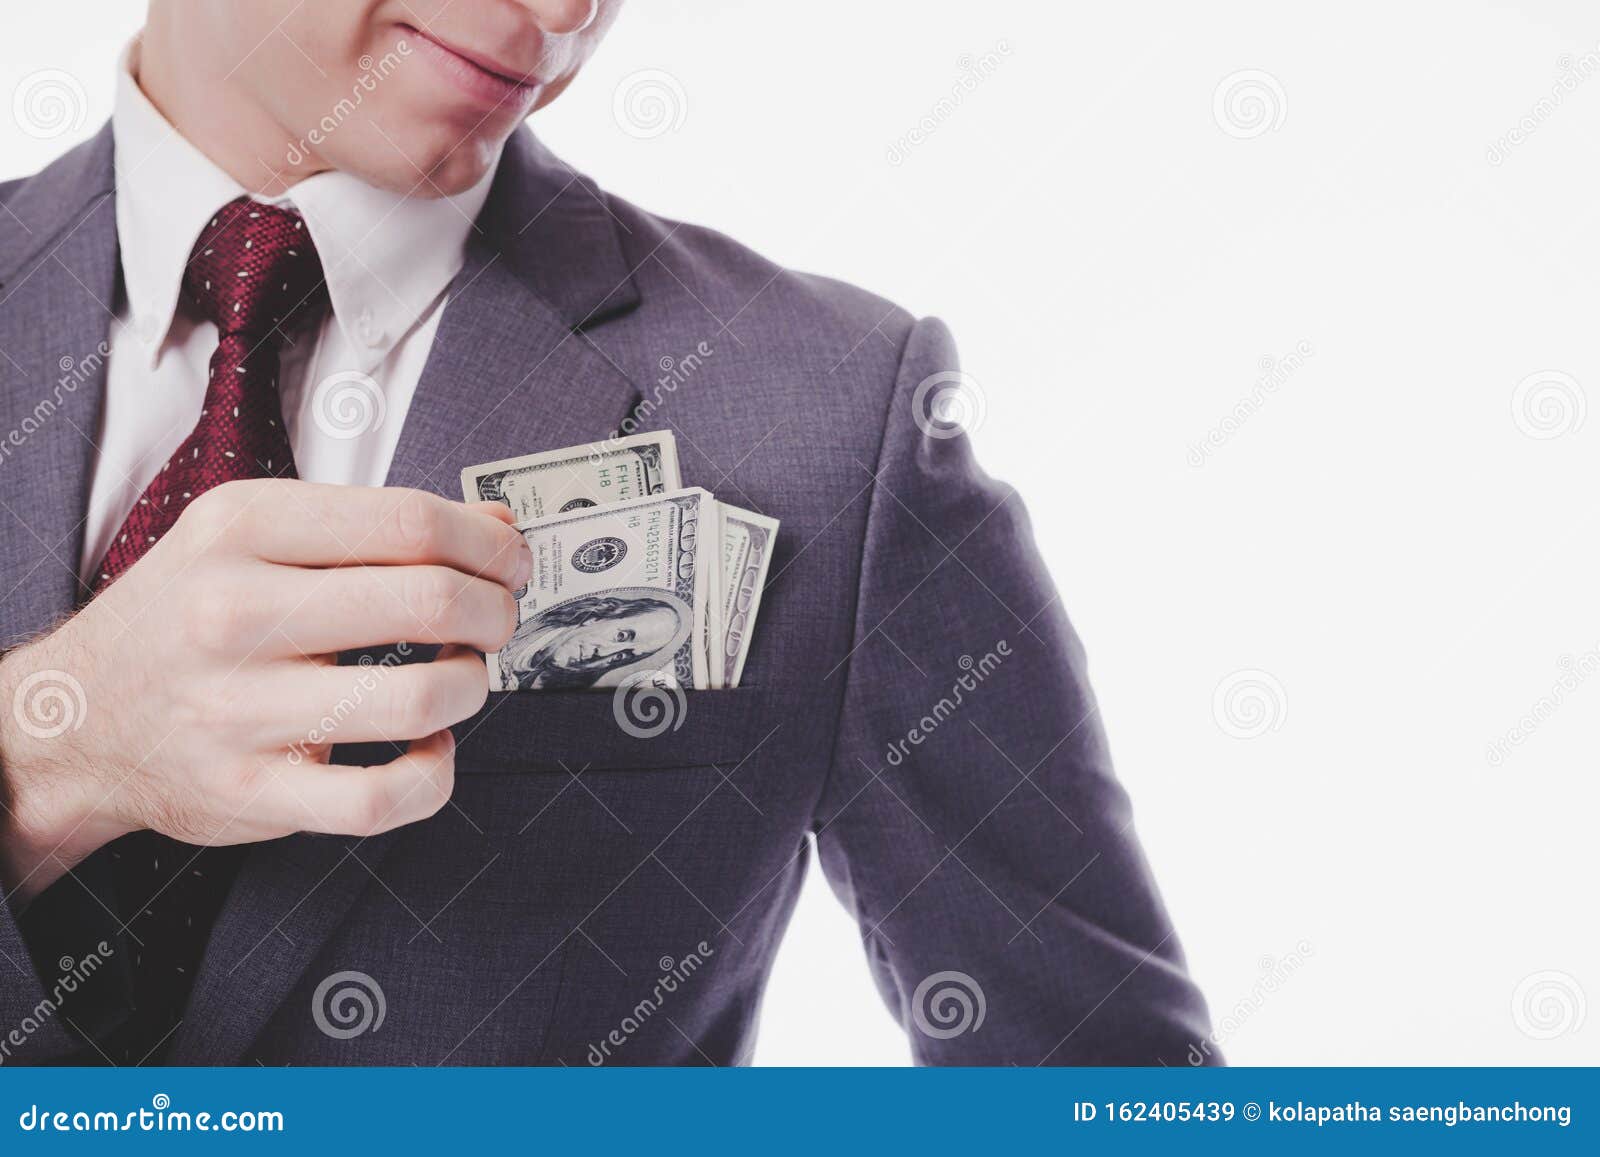 businessman or rich guy pick money from suit pocket with smiley face. millionaire person can earn a lots of money, making a lot of